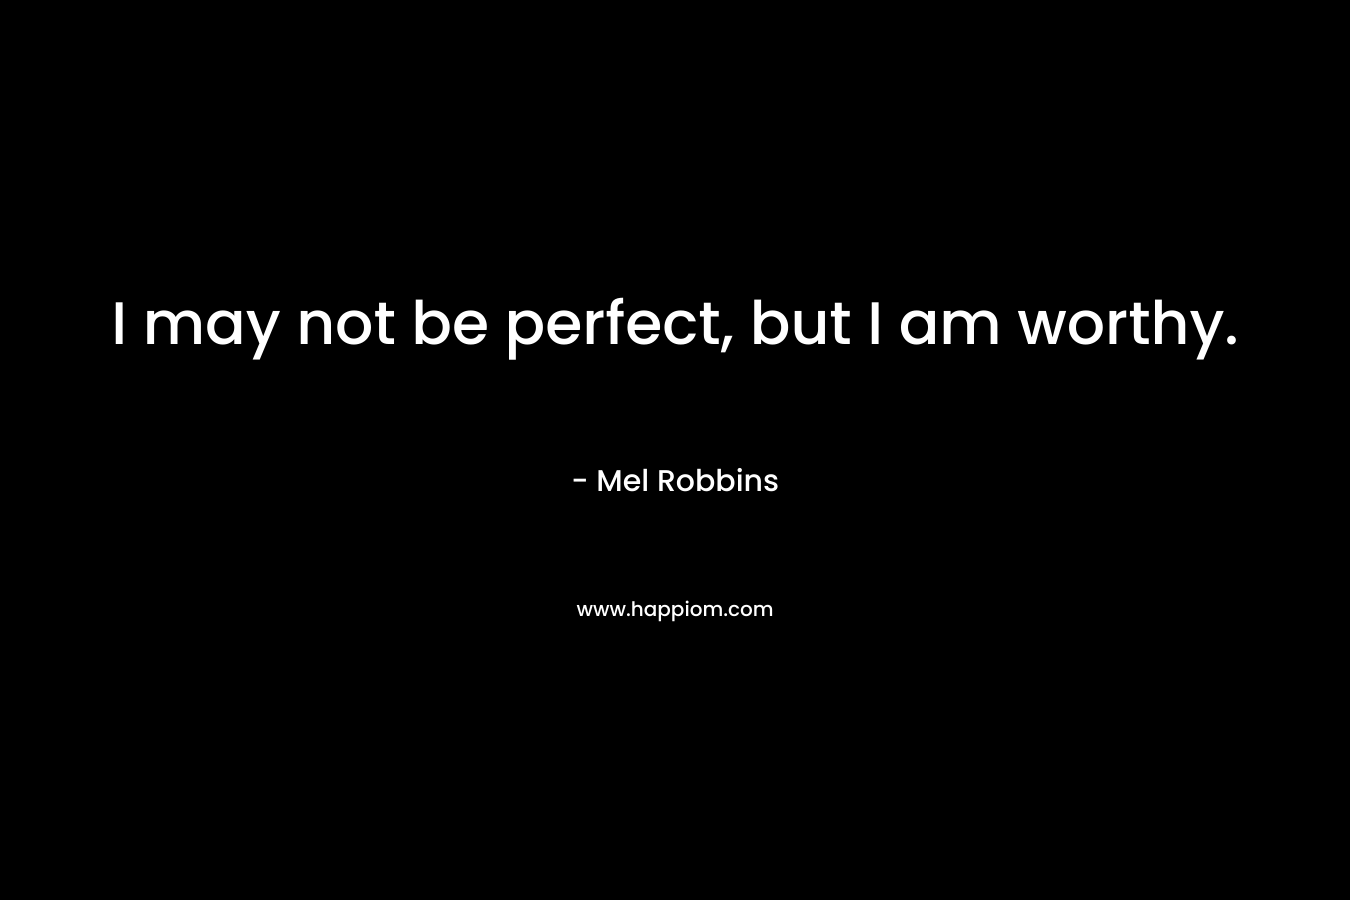 I may not be perfect, but I am worthy.